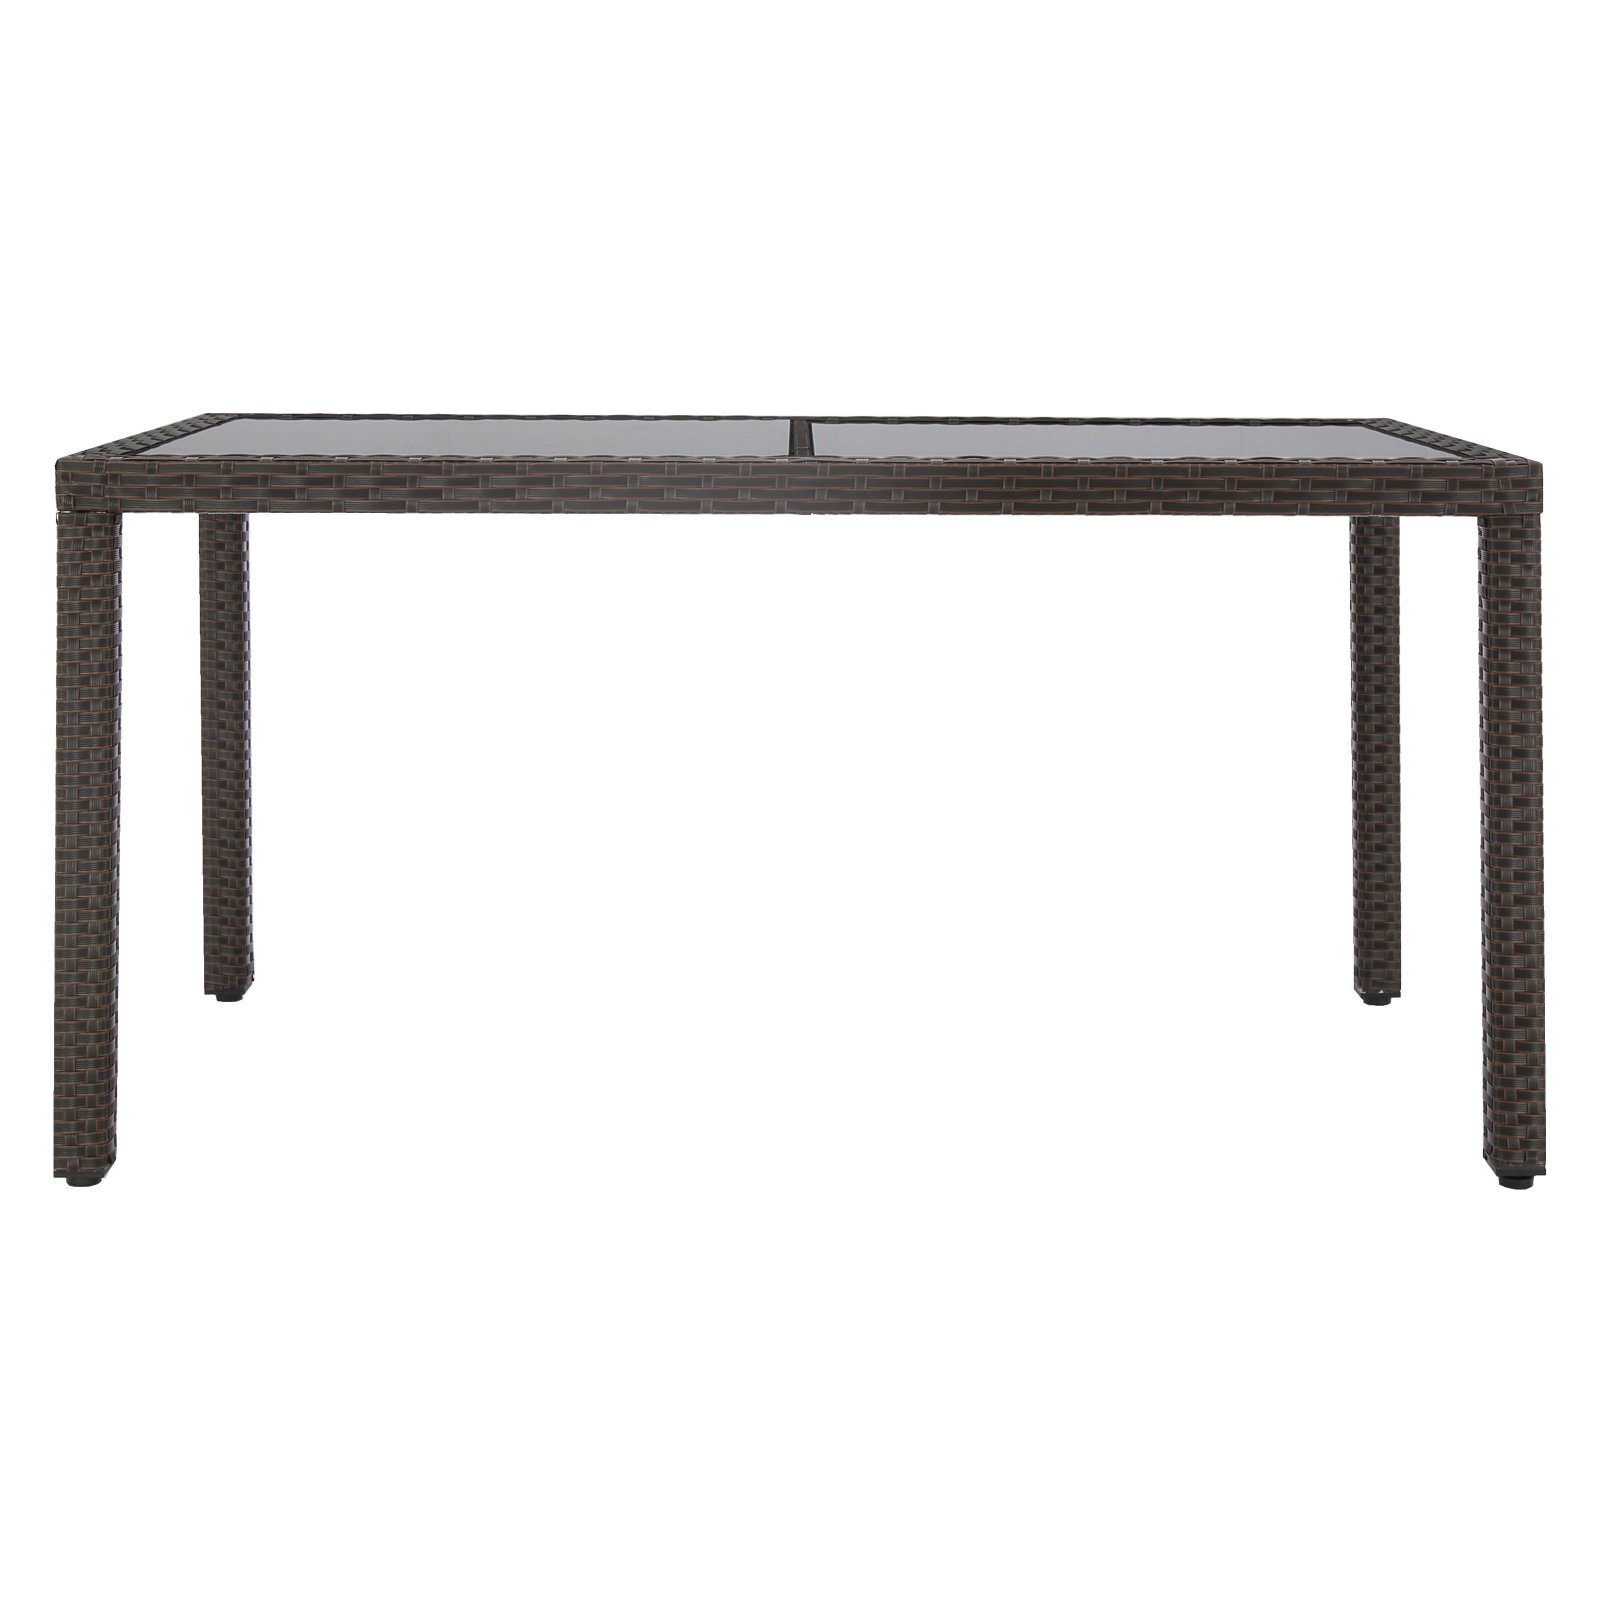 Baner Garden  Outdoor Patio Resin Wicker Steel Rectangle Dining Table Furniture, Chocolate - 57.1 x 30.3 x 28.5 in. - image 3 of 5